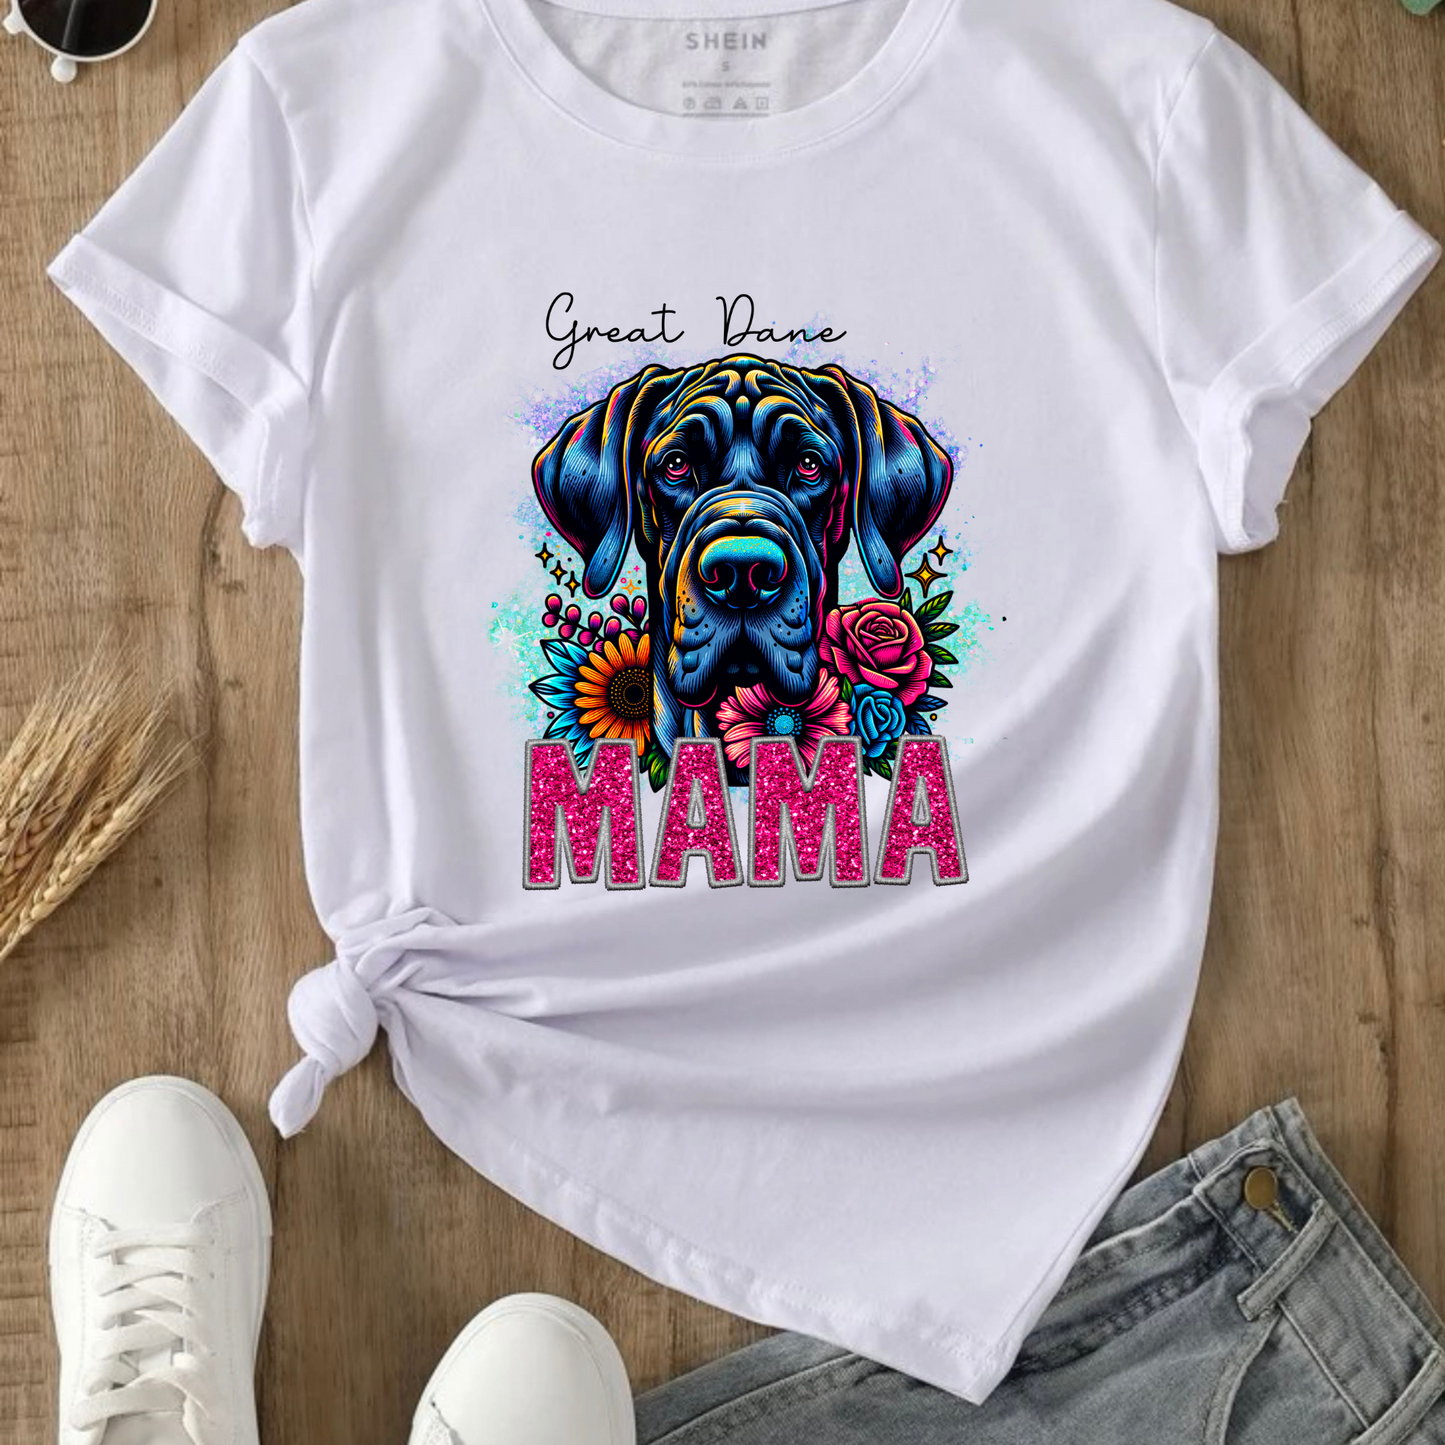 GREAT DANE MAMA DESIGN! YOU CHOOSE COLOR AND STYLE! TEE OR CREWNECK! BLEACHED OR NON-BLEACHED